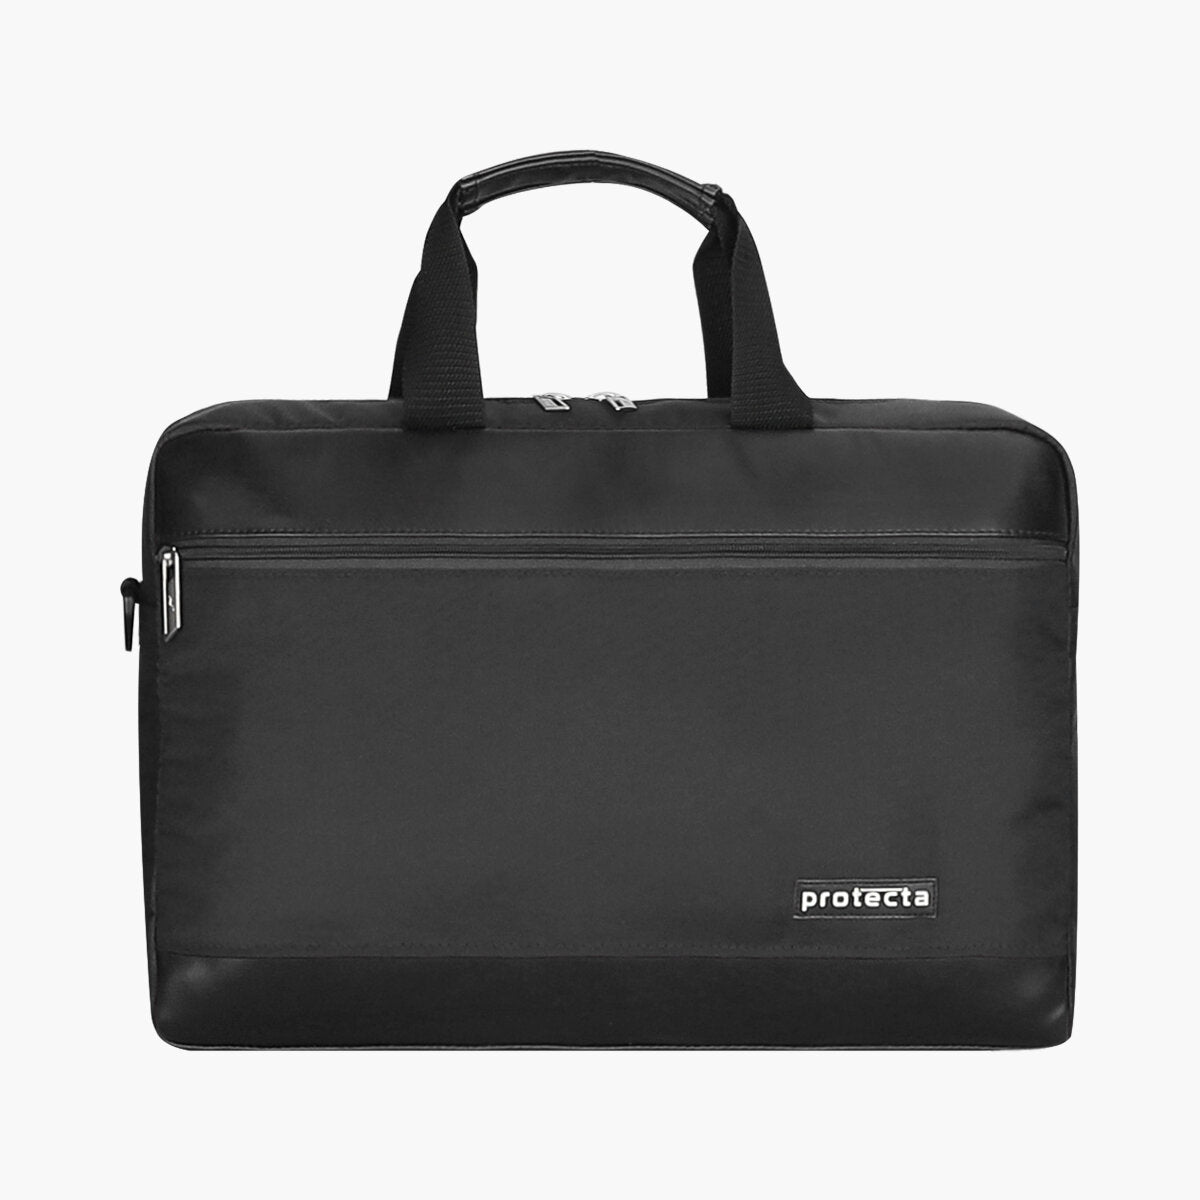 Black | Protecta The Underdog Convertible Briefcase Backpack - Main